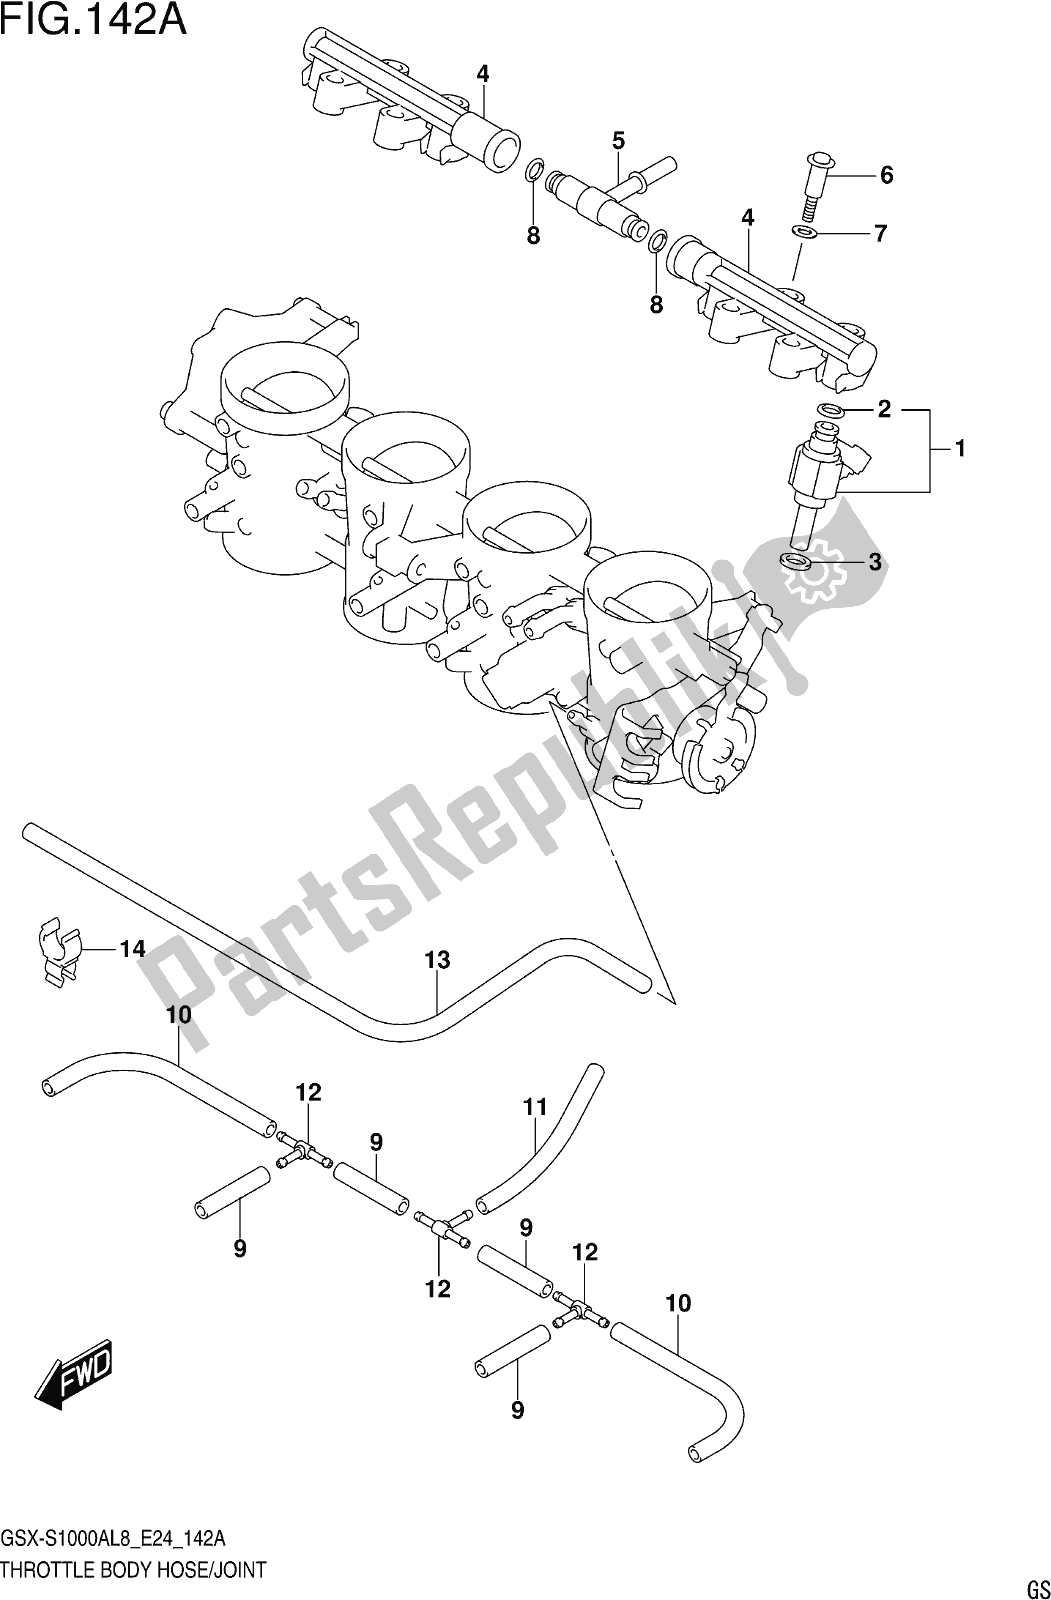 All parts for the Fig. 142a Throttle Body Hose/joint of the Suzuki Gsx-s 1000 AZ 2018